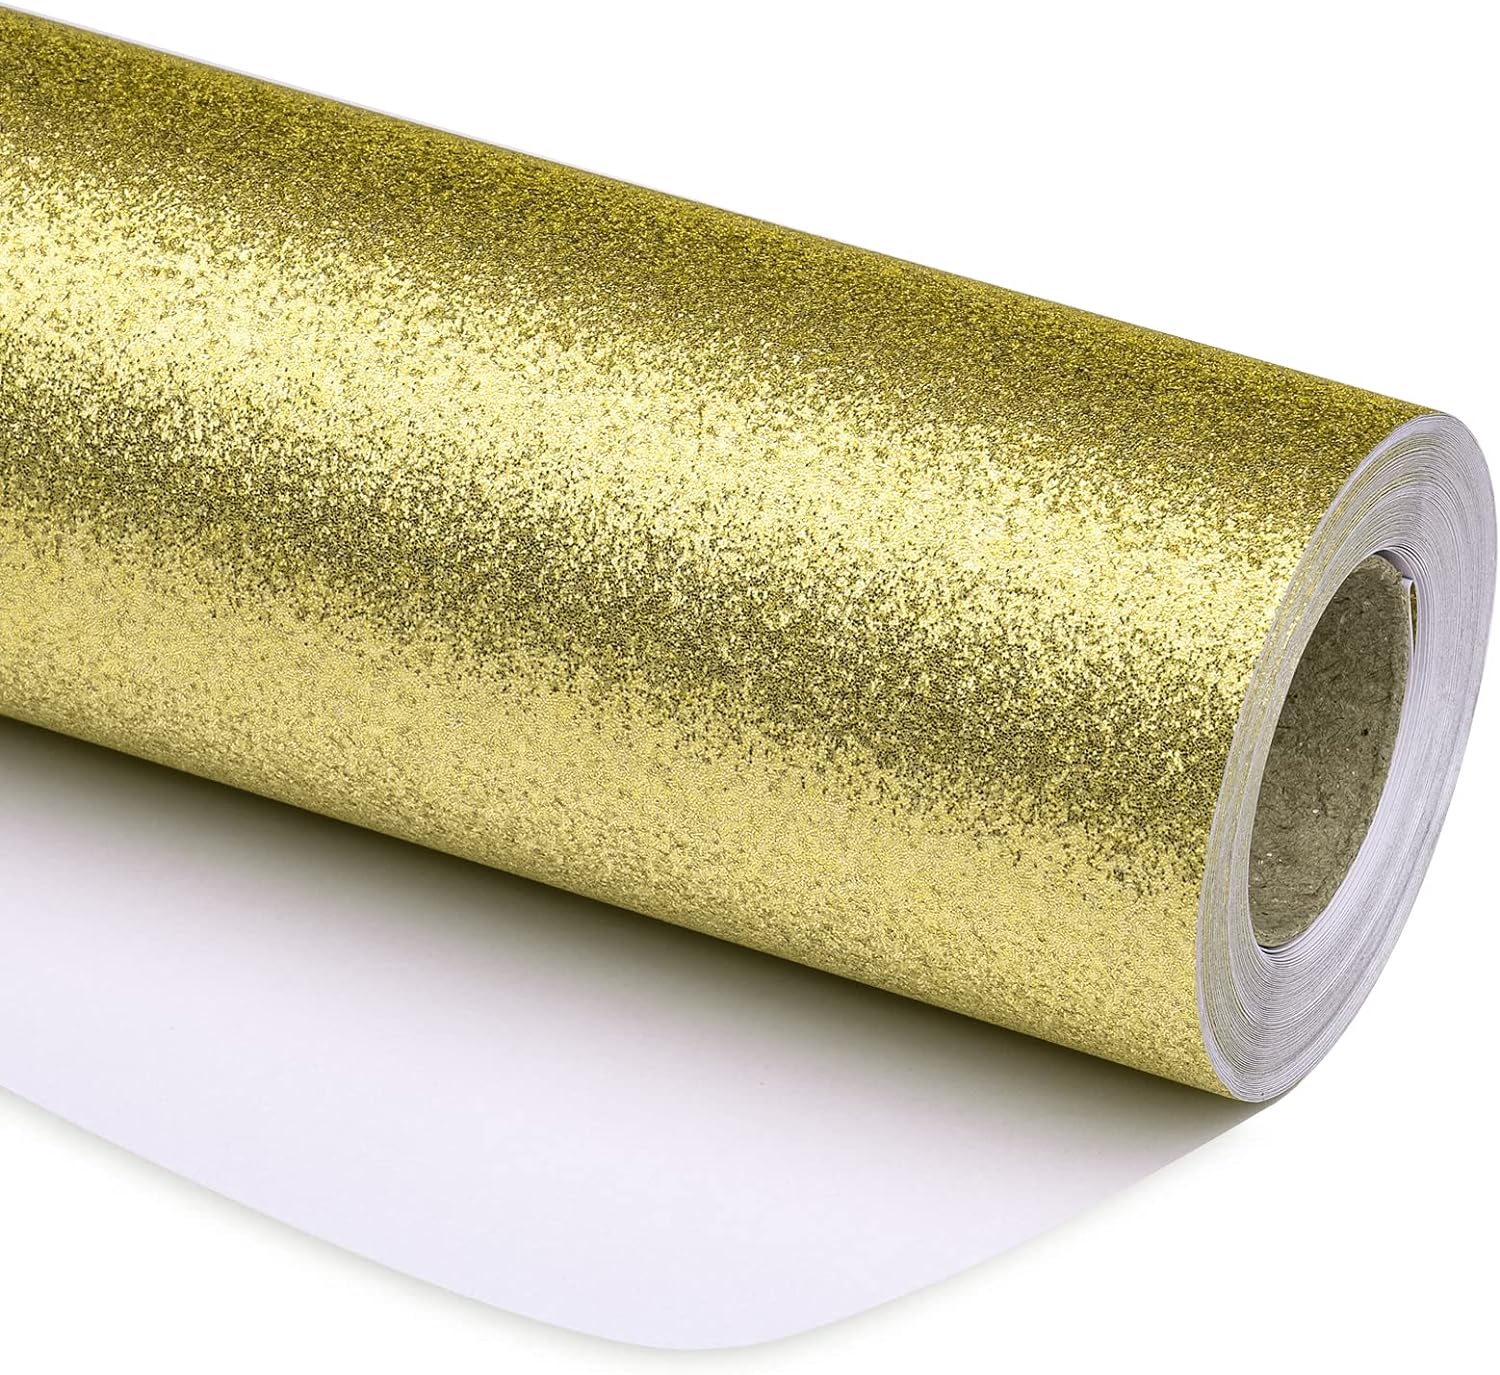  Bright Creations Gold Glitter Contact Paper Roll for DIY  Crafts, Peel and Stick Art Decal for Scrapbooking (17.7 in x 16.5 Ft) :  Arts, Crafts & Sewing